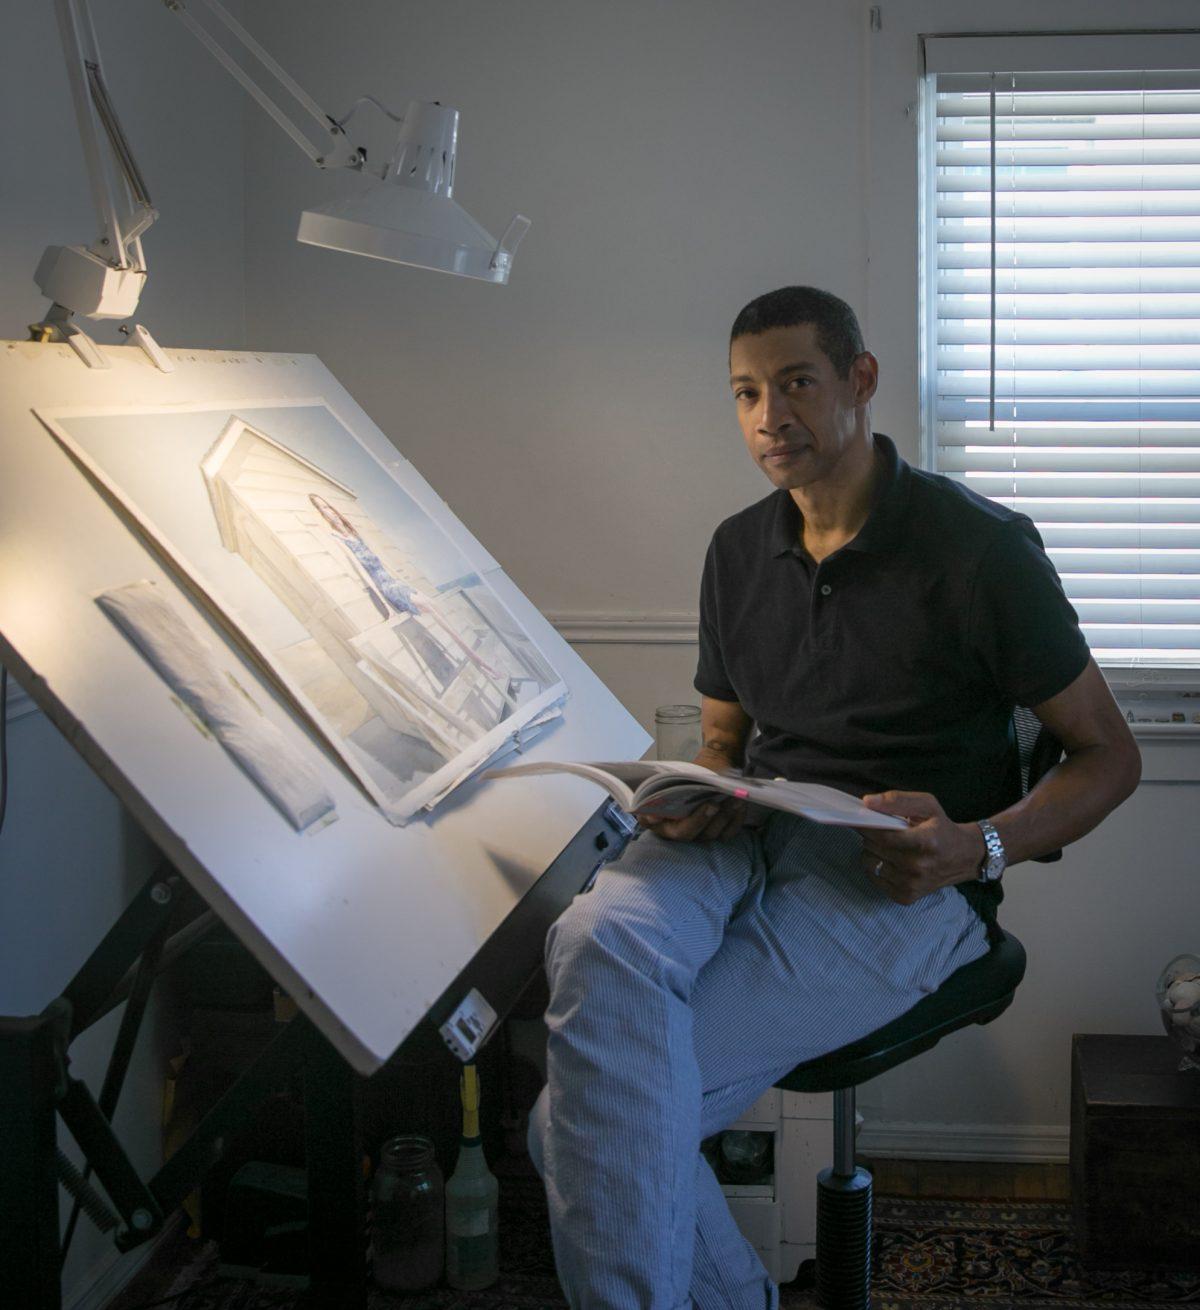 Mario A. Robinson shows his paintings, drawings, and book in his studio at home in Point Pleasant, New Jersey, on Sept. 4, 2018. (Milene Fernandez/The Epoch Times)